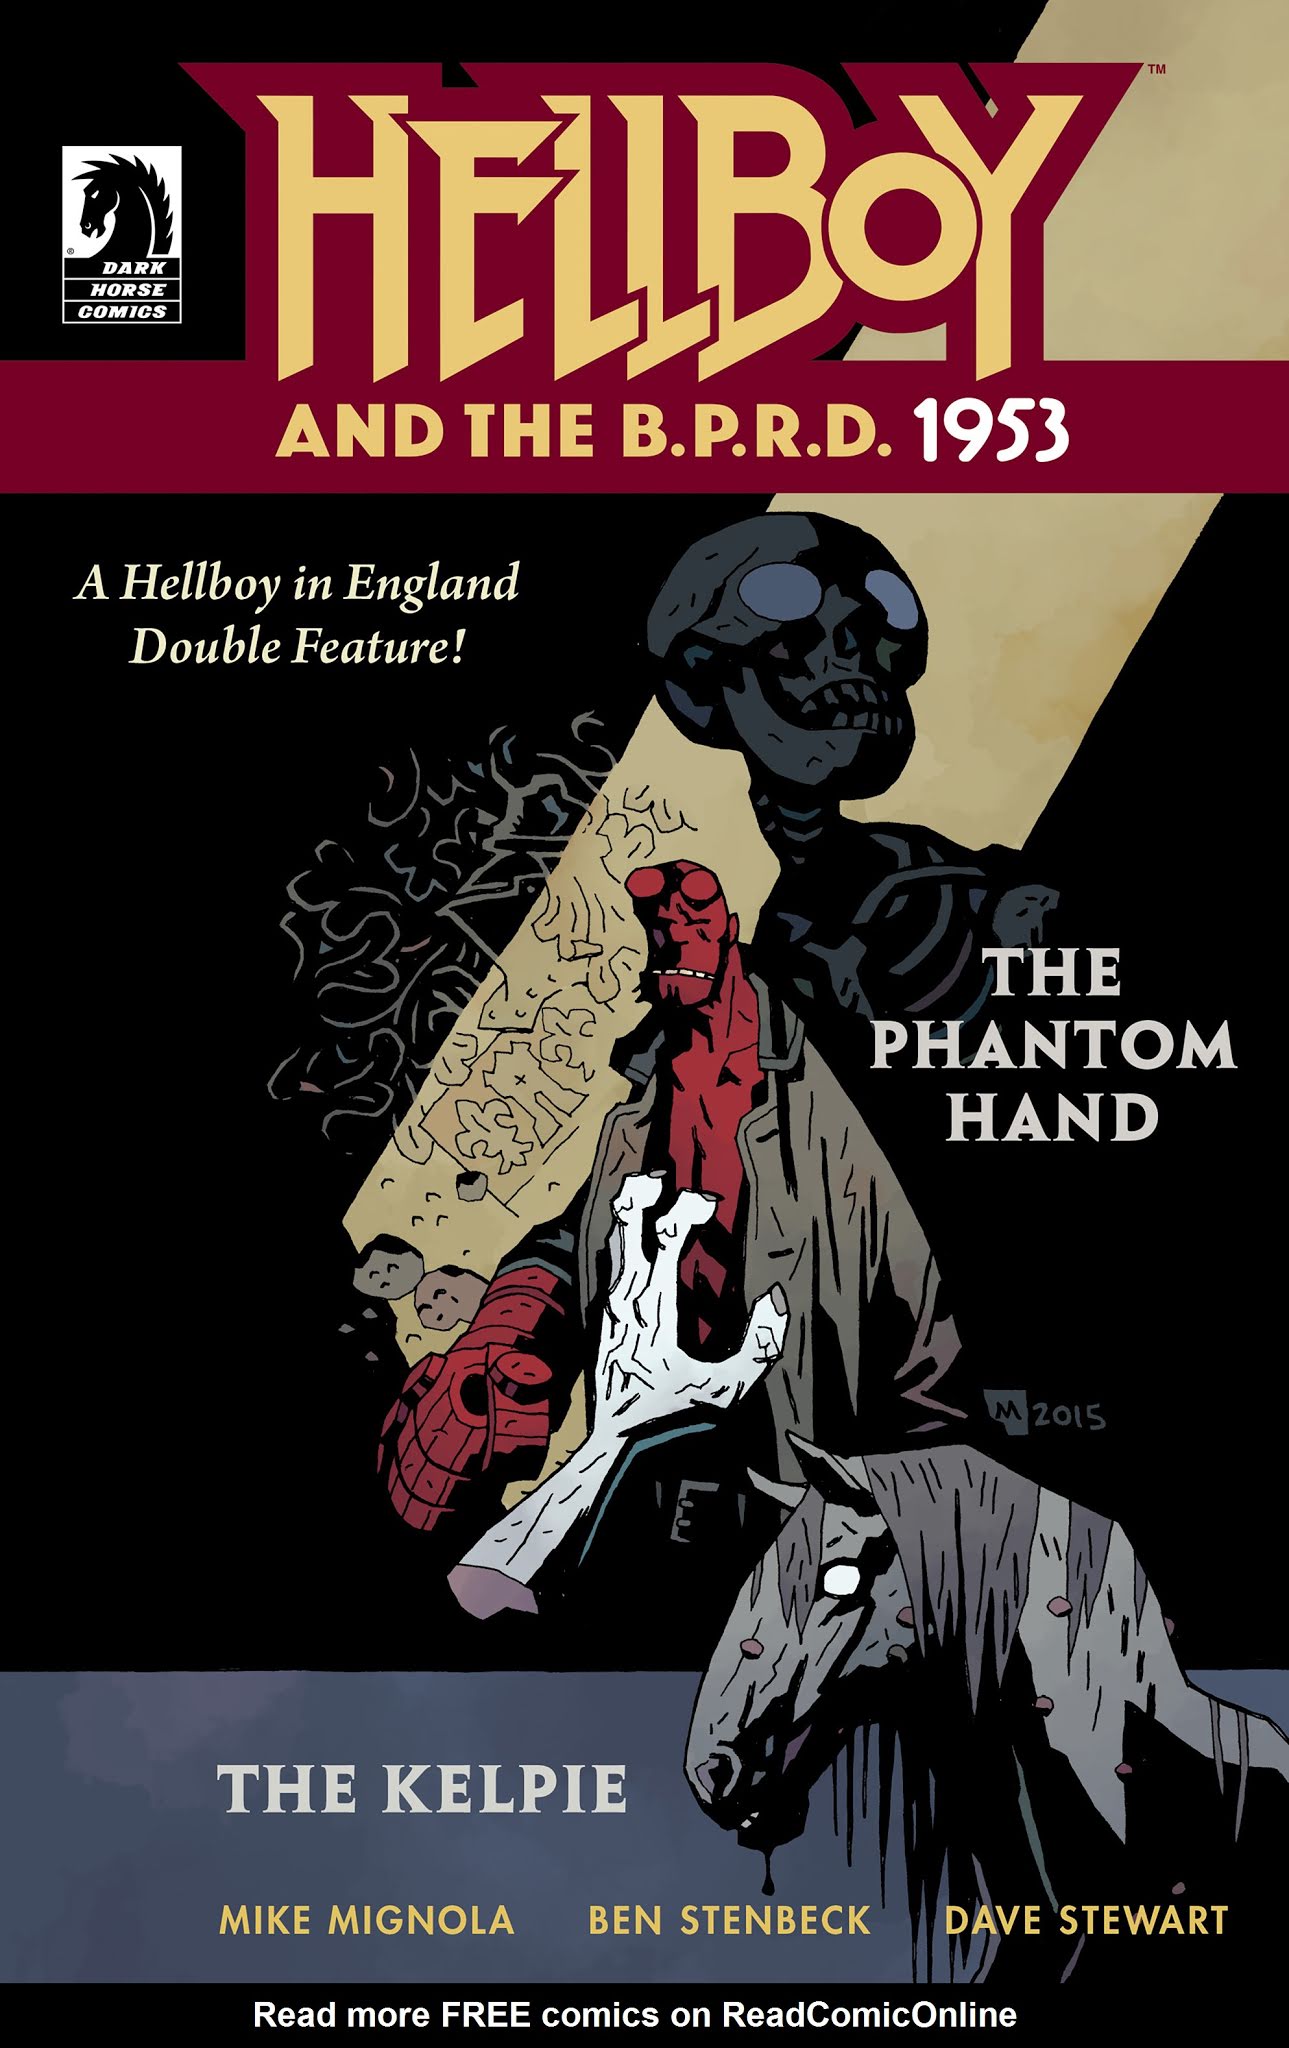 Hellboy and the B.P.R.D.: 1953 - The Phantom Hand & the Kelpie Full Page 1